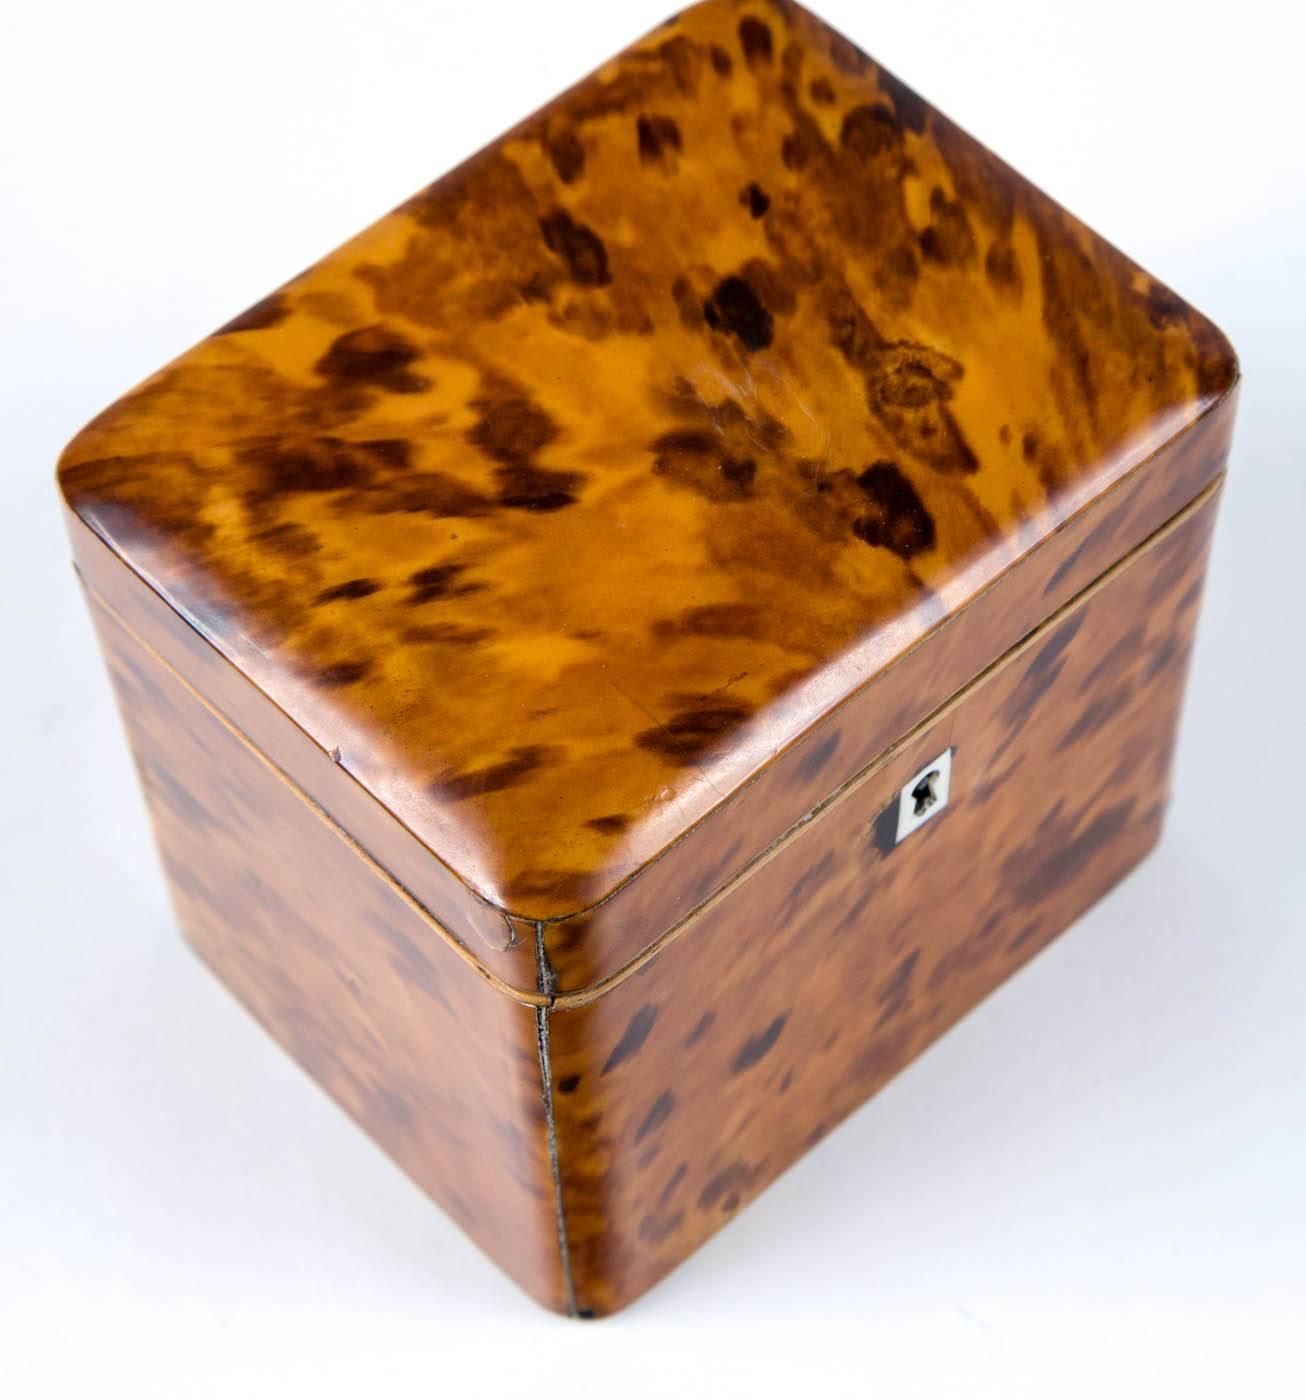 Antique blonde English cattle bone 1790 tortoiseshell tea caddy box, Skeleton lock no key, with special compartment lid for you to store the tea or whatever. Red velvet lining is faded and has some wear, consistent to the age of the piece.
The